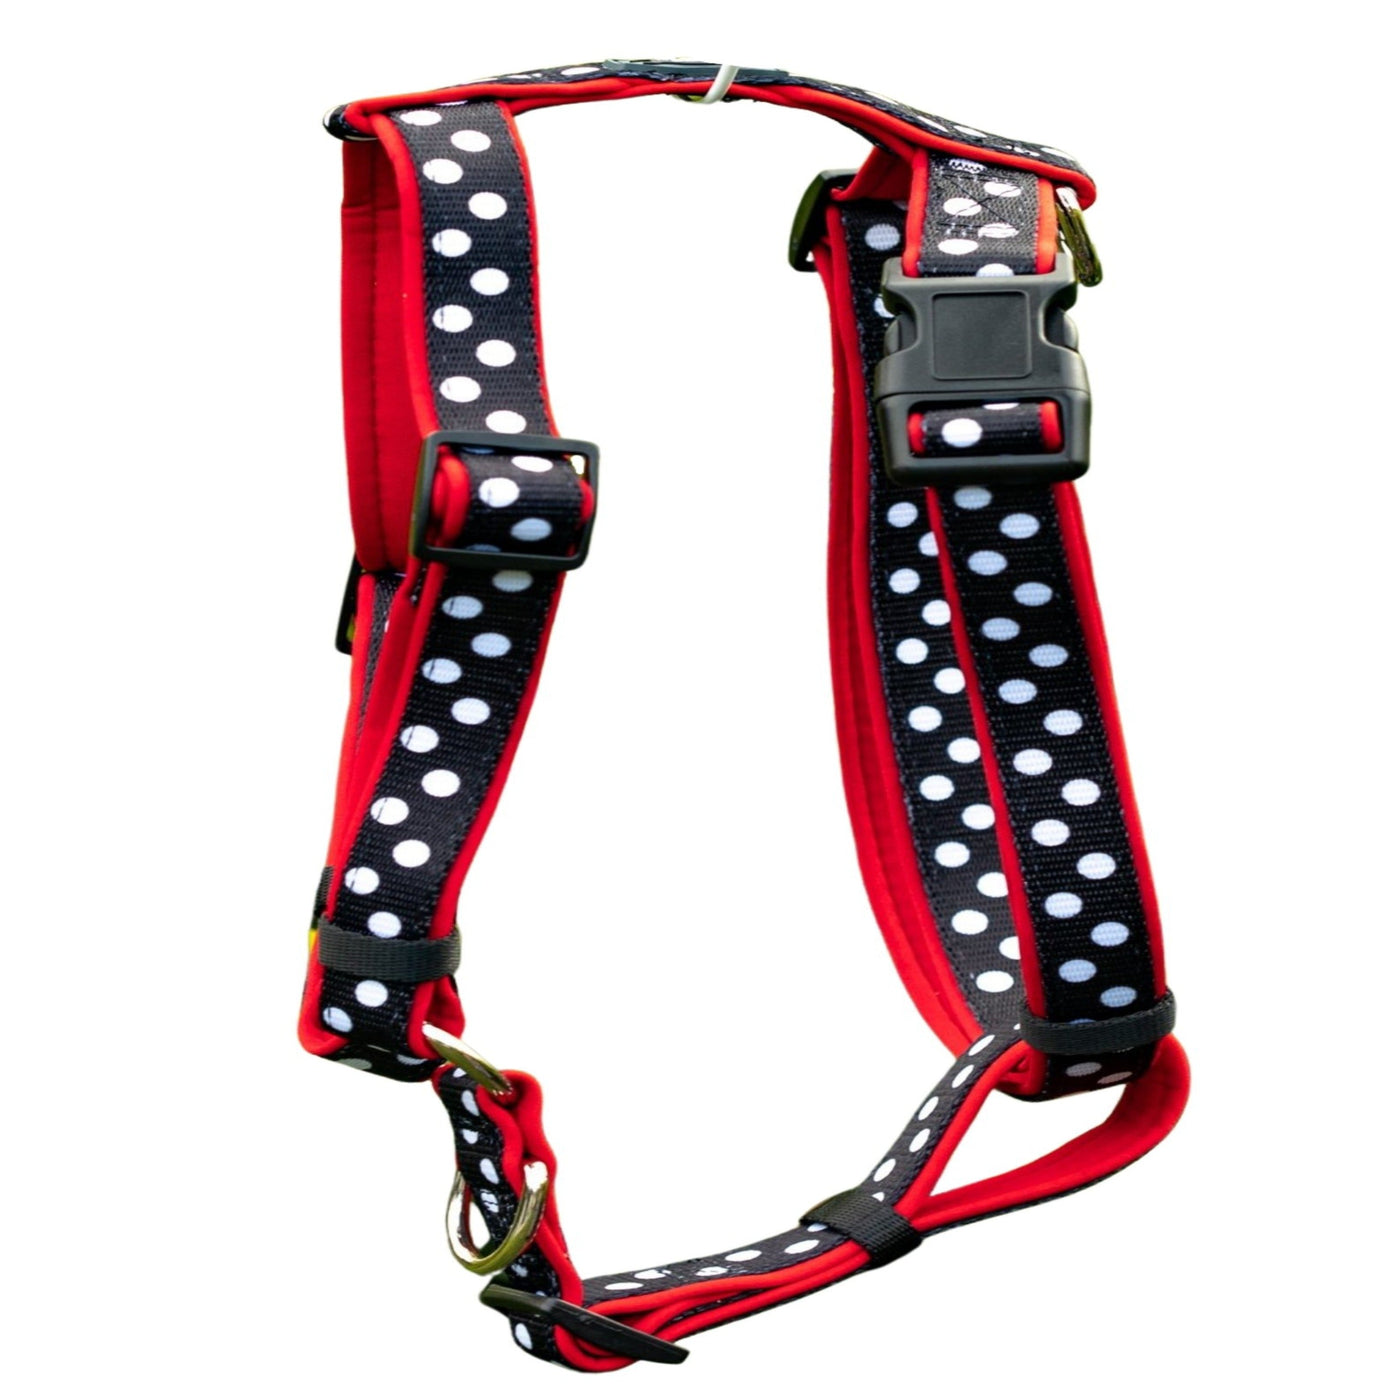 DOG HARNESS, Spotty Dox- Padded H-Harness, With Front & Back Attachment-Harness-Dizzy Dog Collars